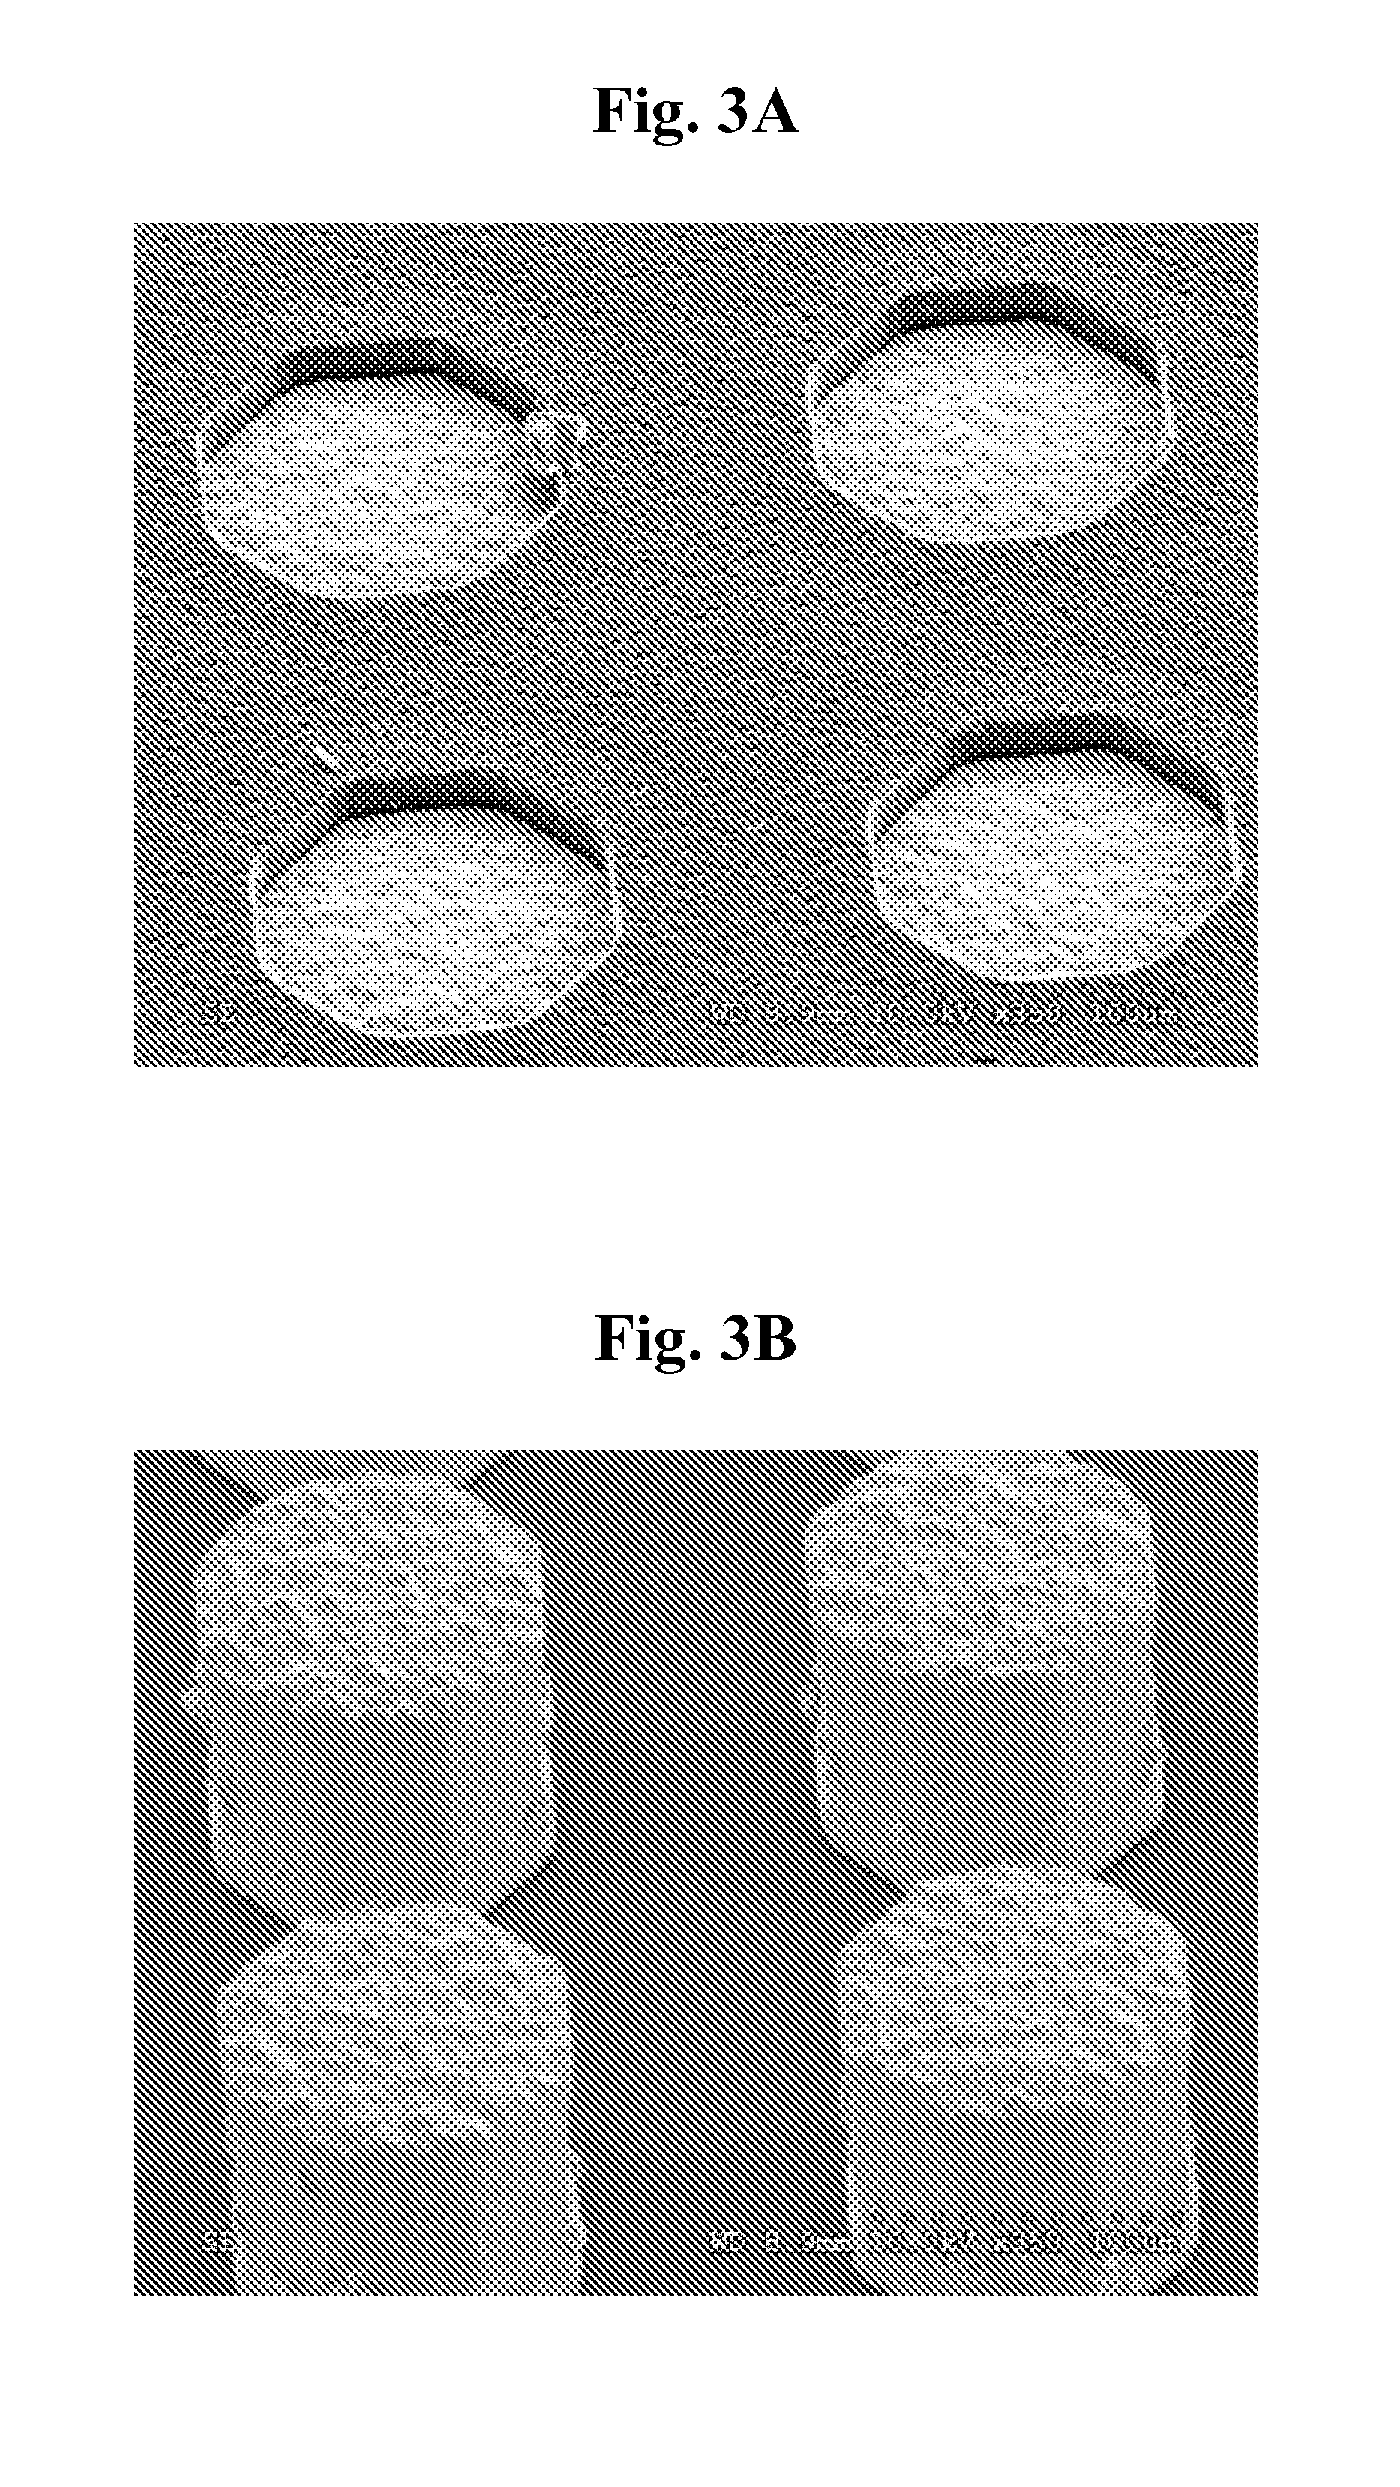 Compositions and method for removing coatings and preparation of surfaces for use in metal finishing, and manufacturing of electronic and microelectronic devices